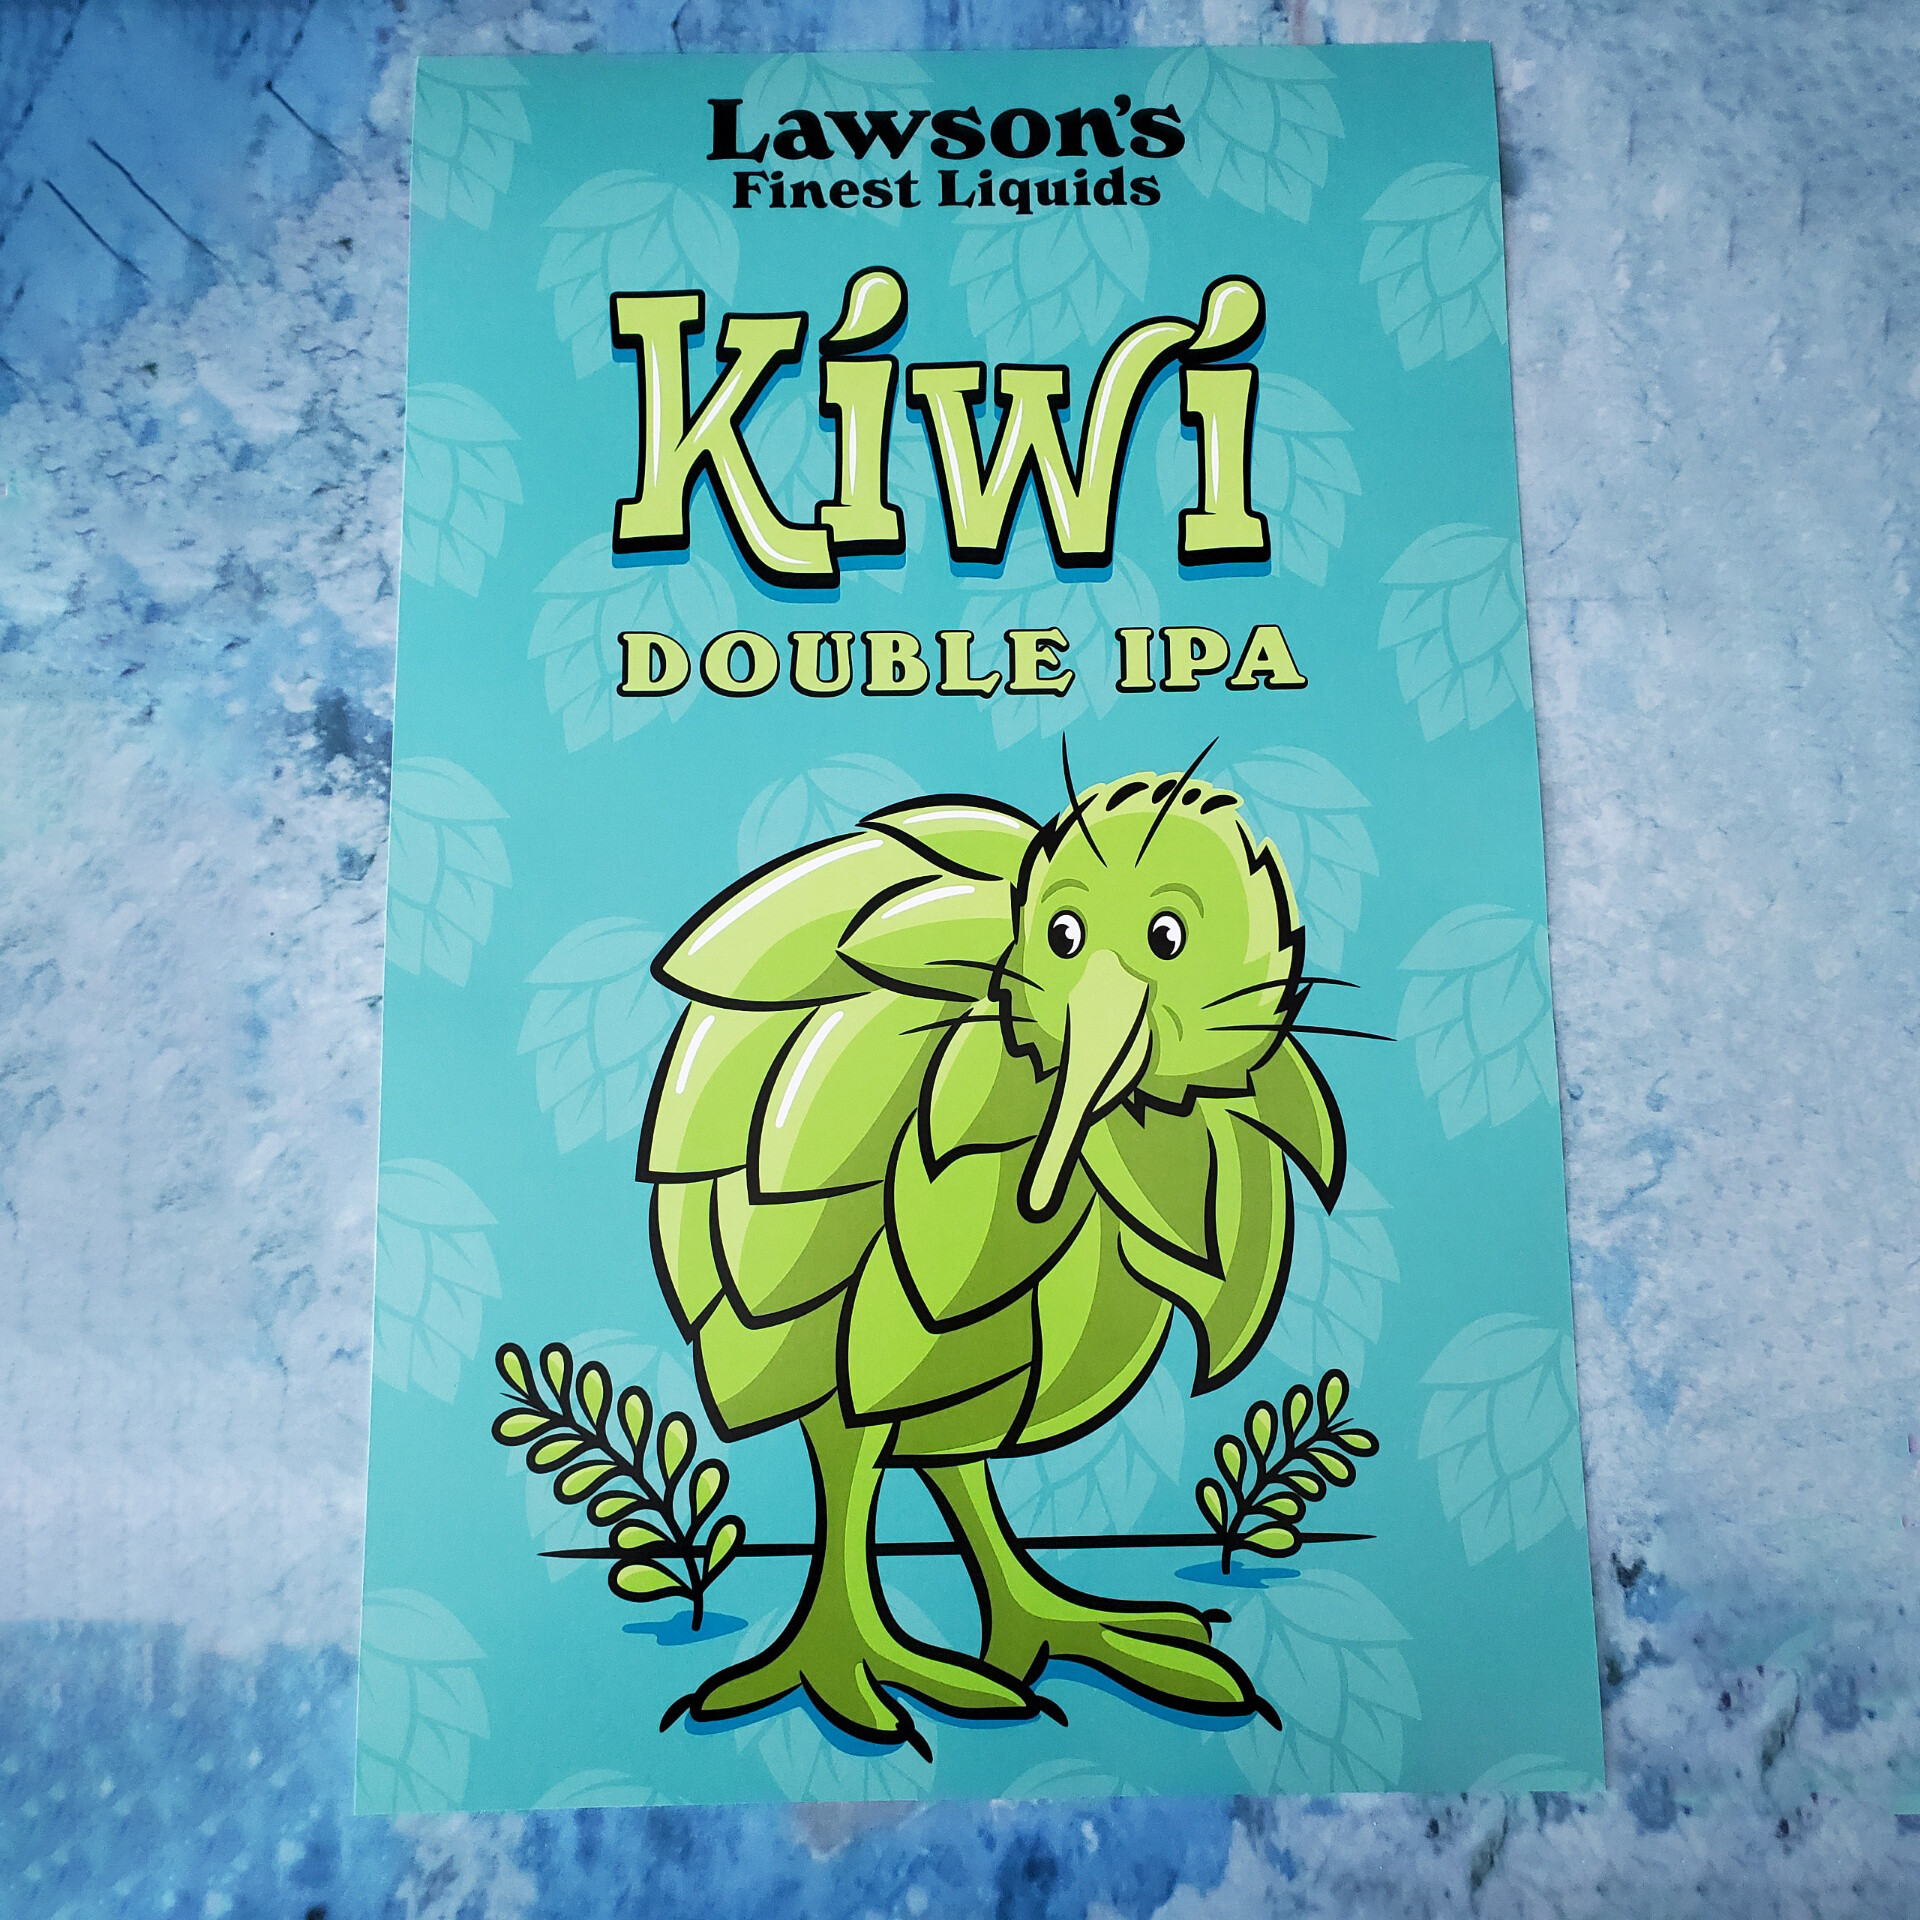 Printed Poster for Lawson's Finest Liquids Kiwi Double IPA